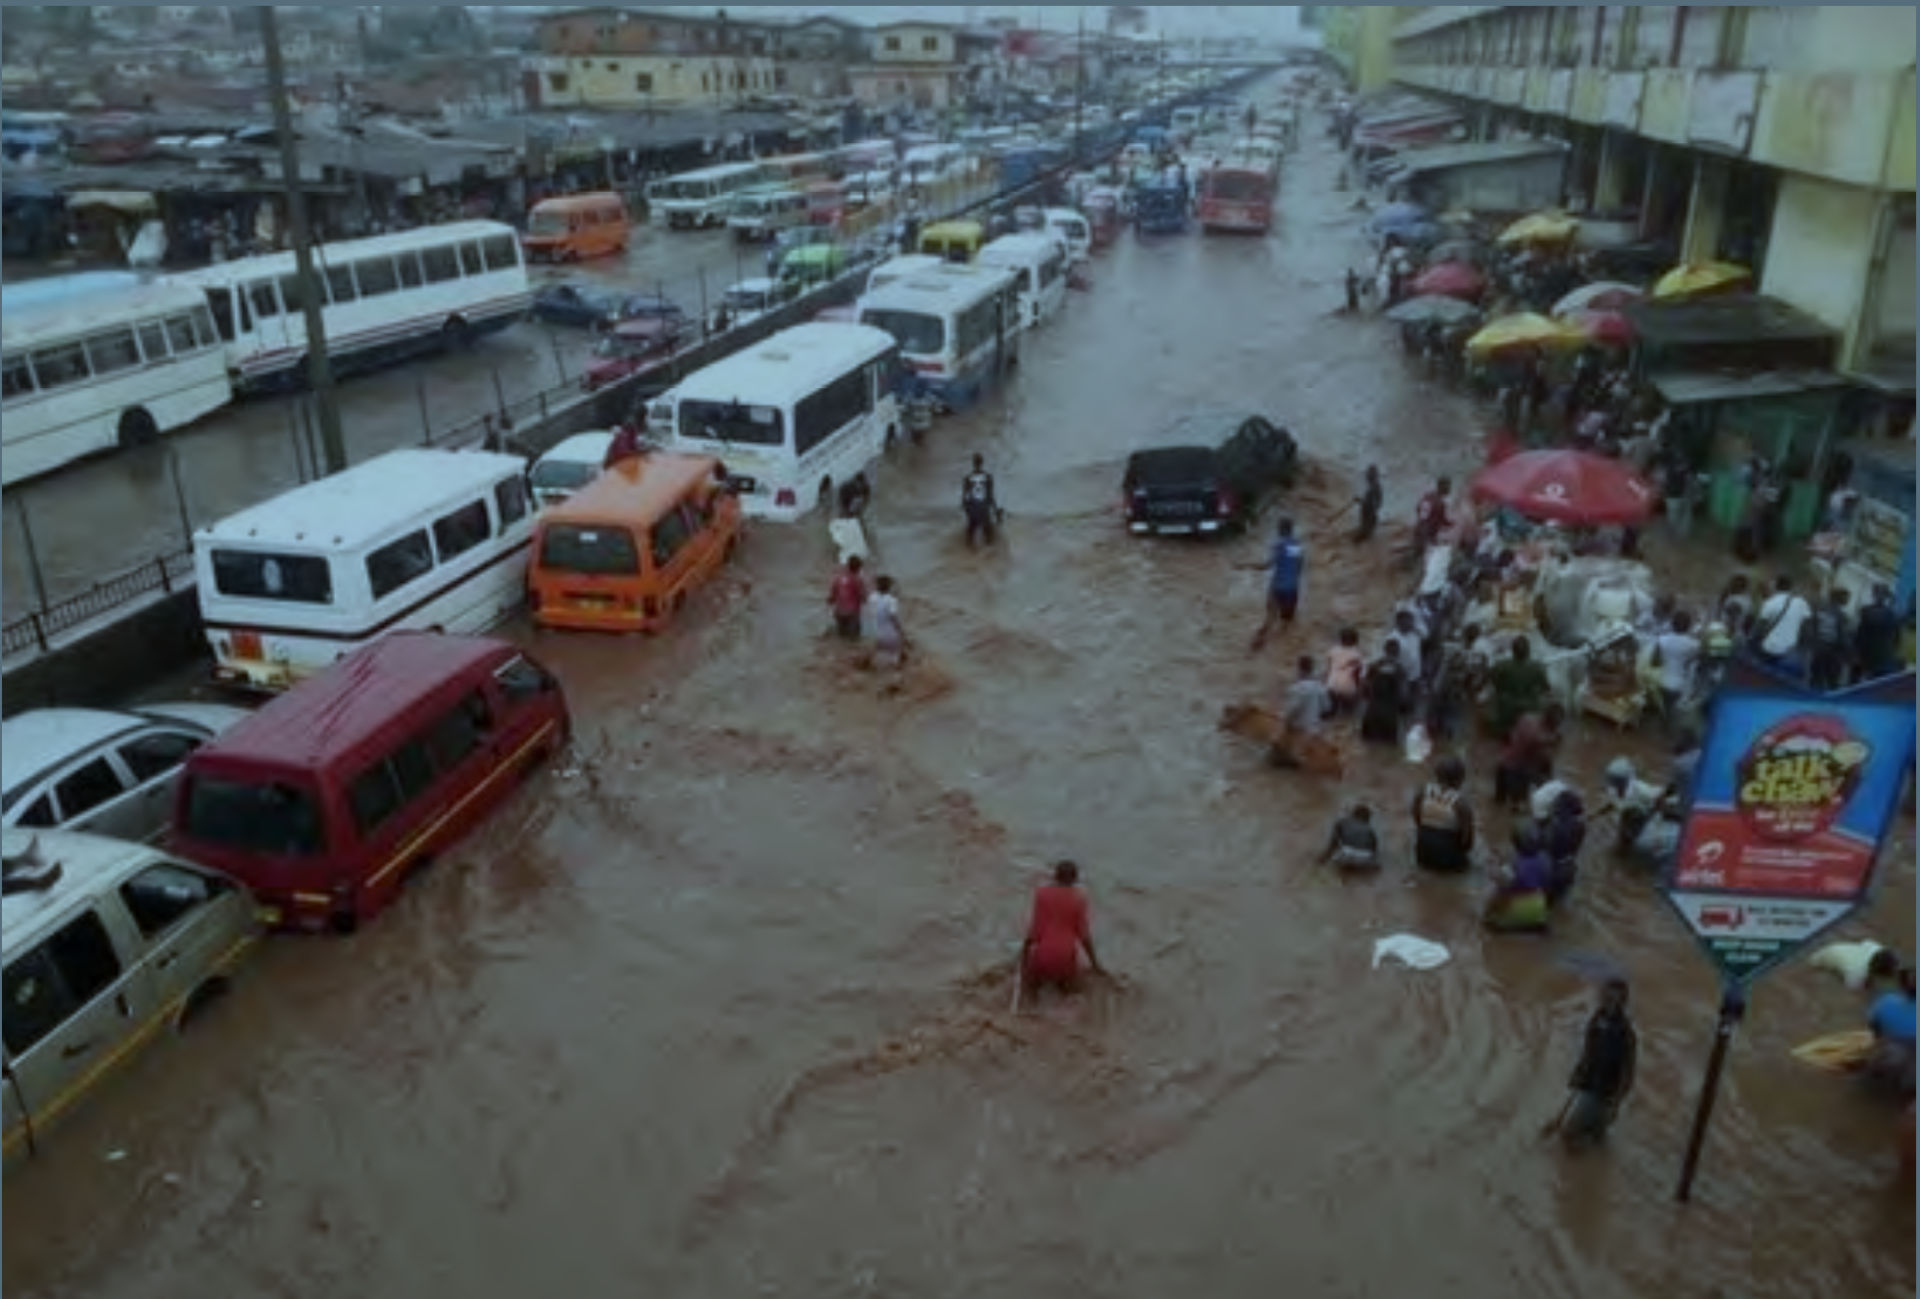 Flooding in Accra, Ghana, June 2015. Photo courtesy of pulse.com.gh